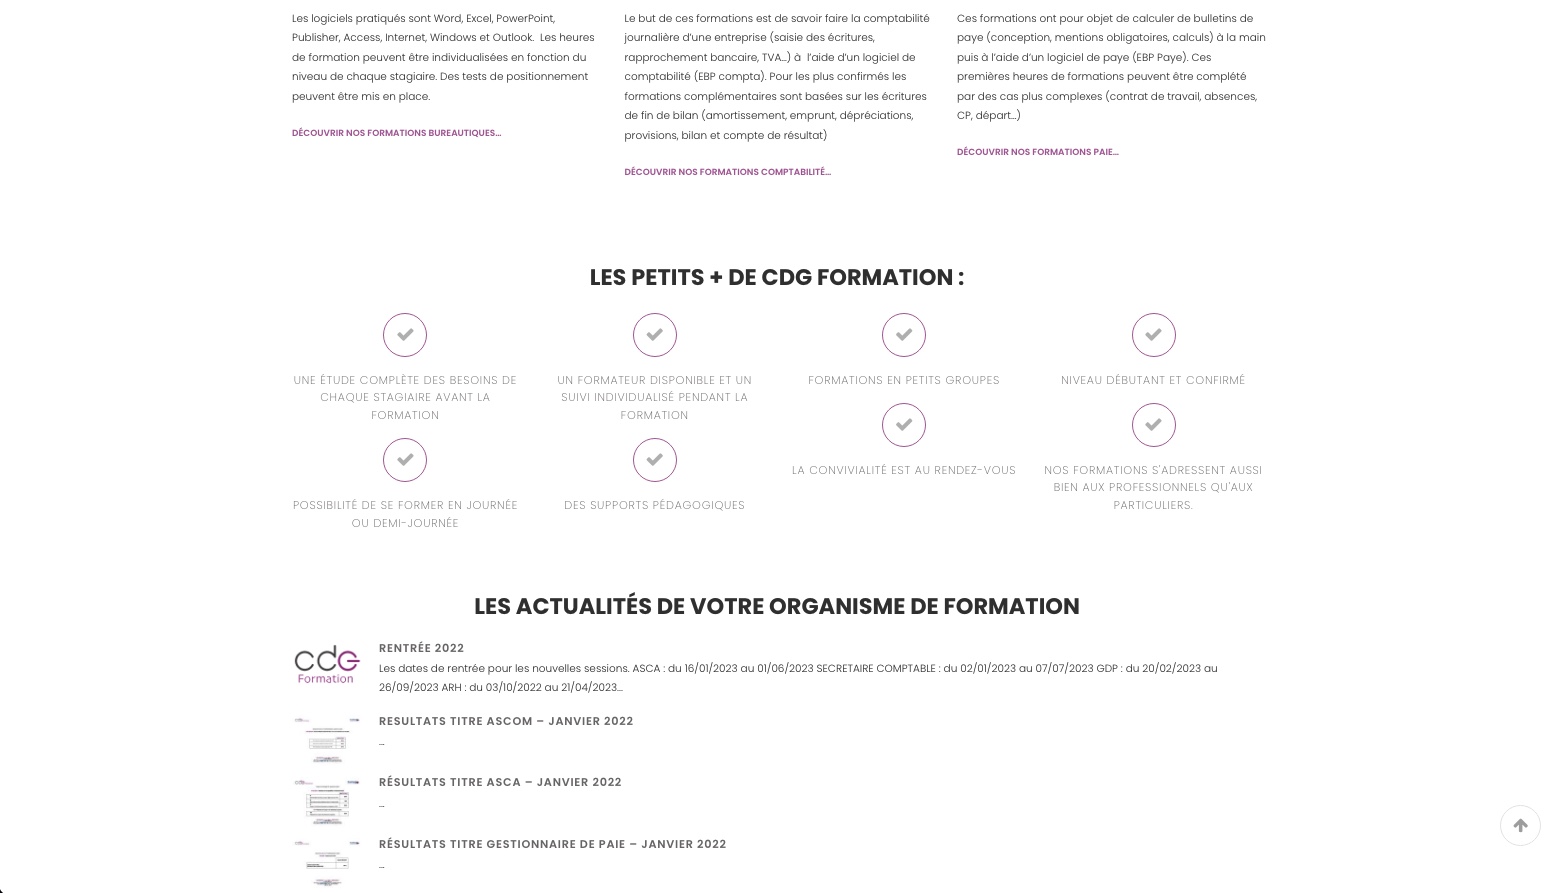 cdg formation - creation site internet administrable